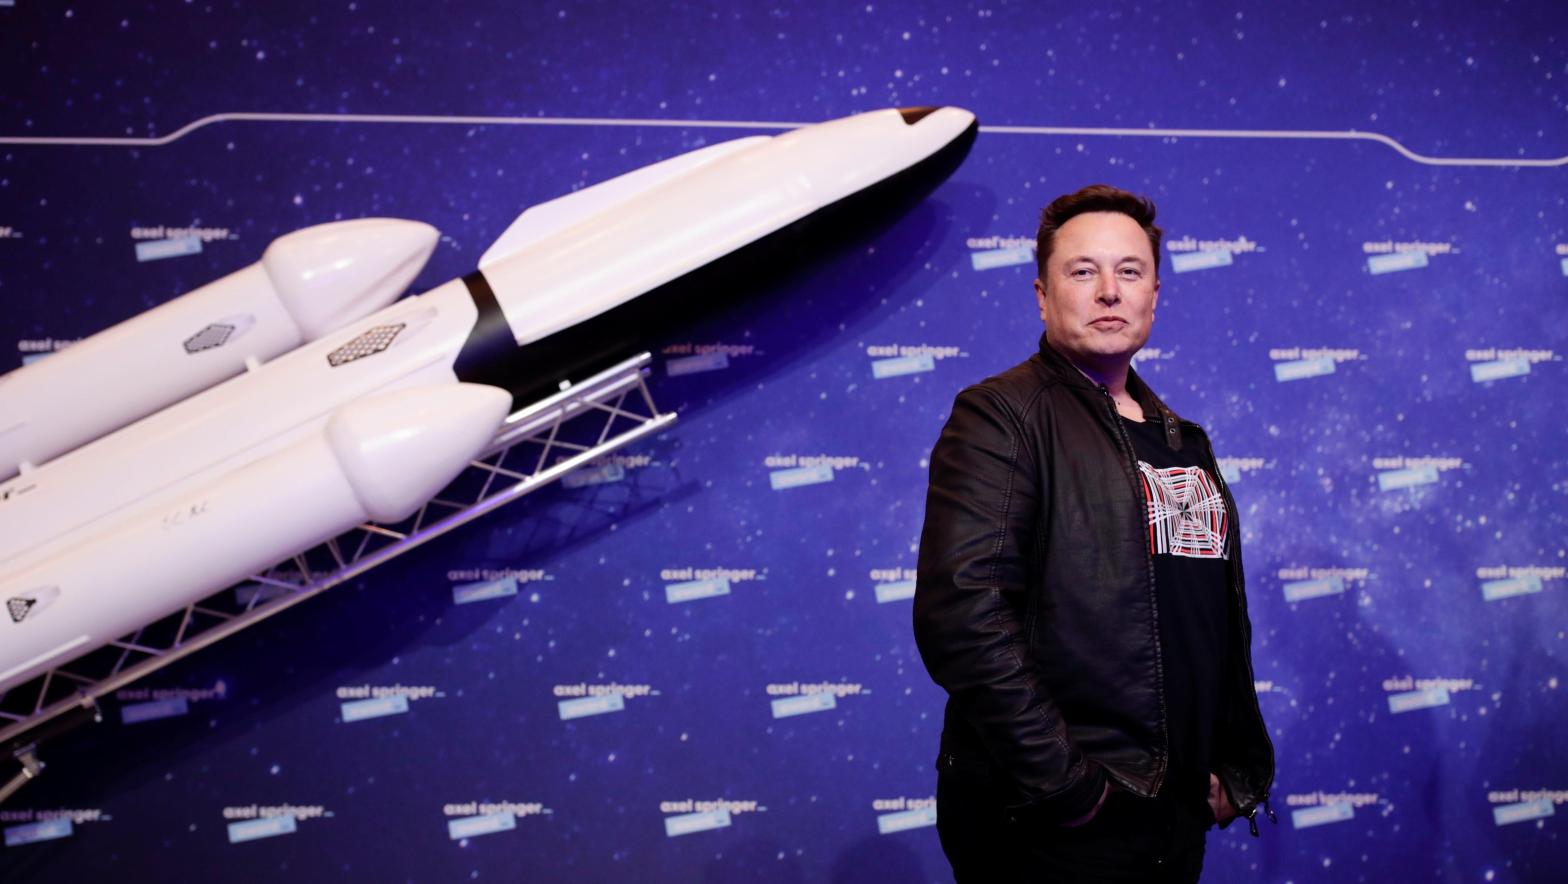 SpaceX owner and Tesla CEO Elon Musk poses on the red carpet of the Axel Springer Award 2020 on December 01, 2020 in Berlin, Germany. (Photo: Hannibal Hanschke-Pool, Getty Images)